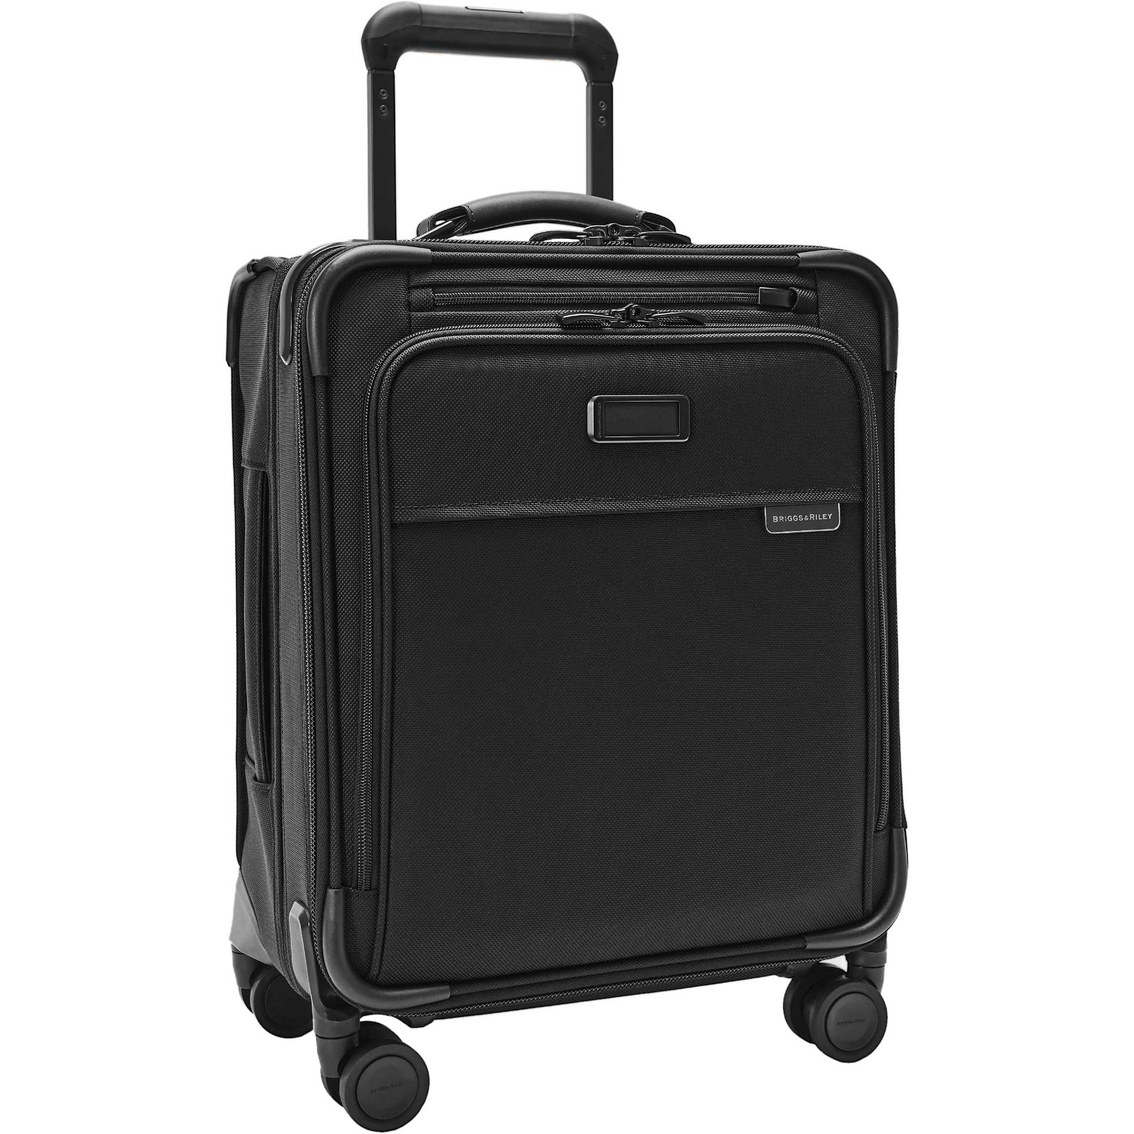 Briggs & Riley Baseline Compact Carry On Spinner, Black - Image 3 of 9